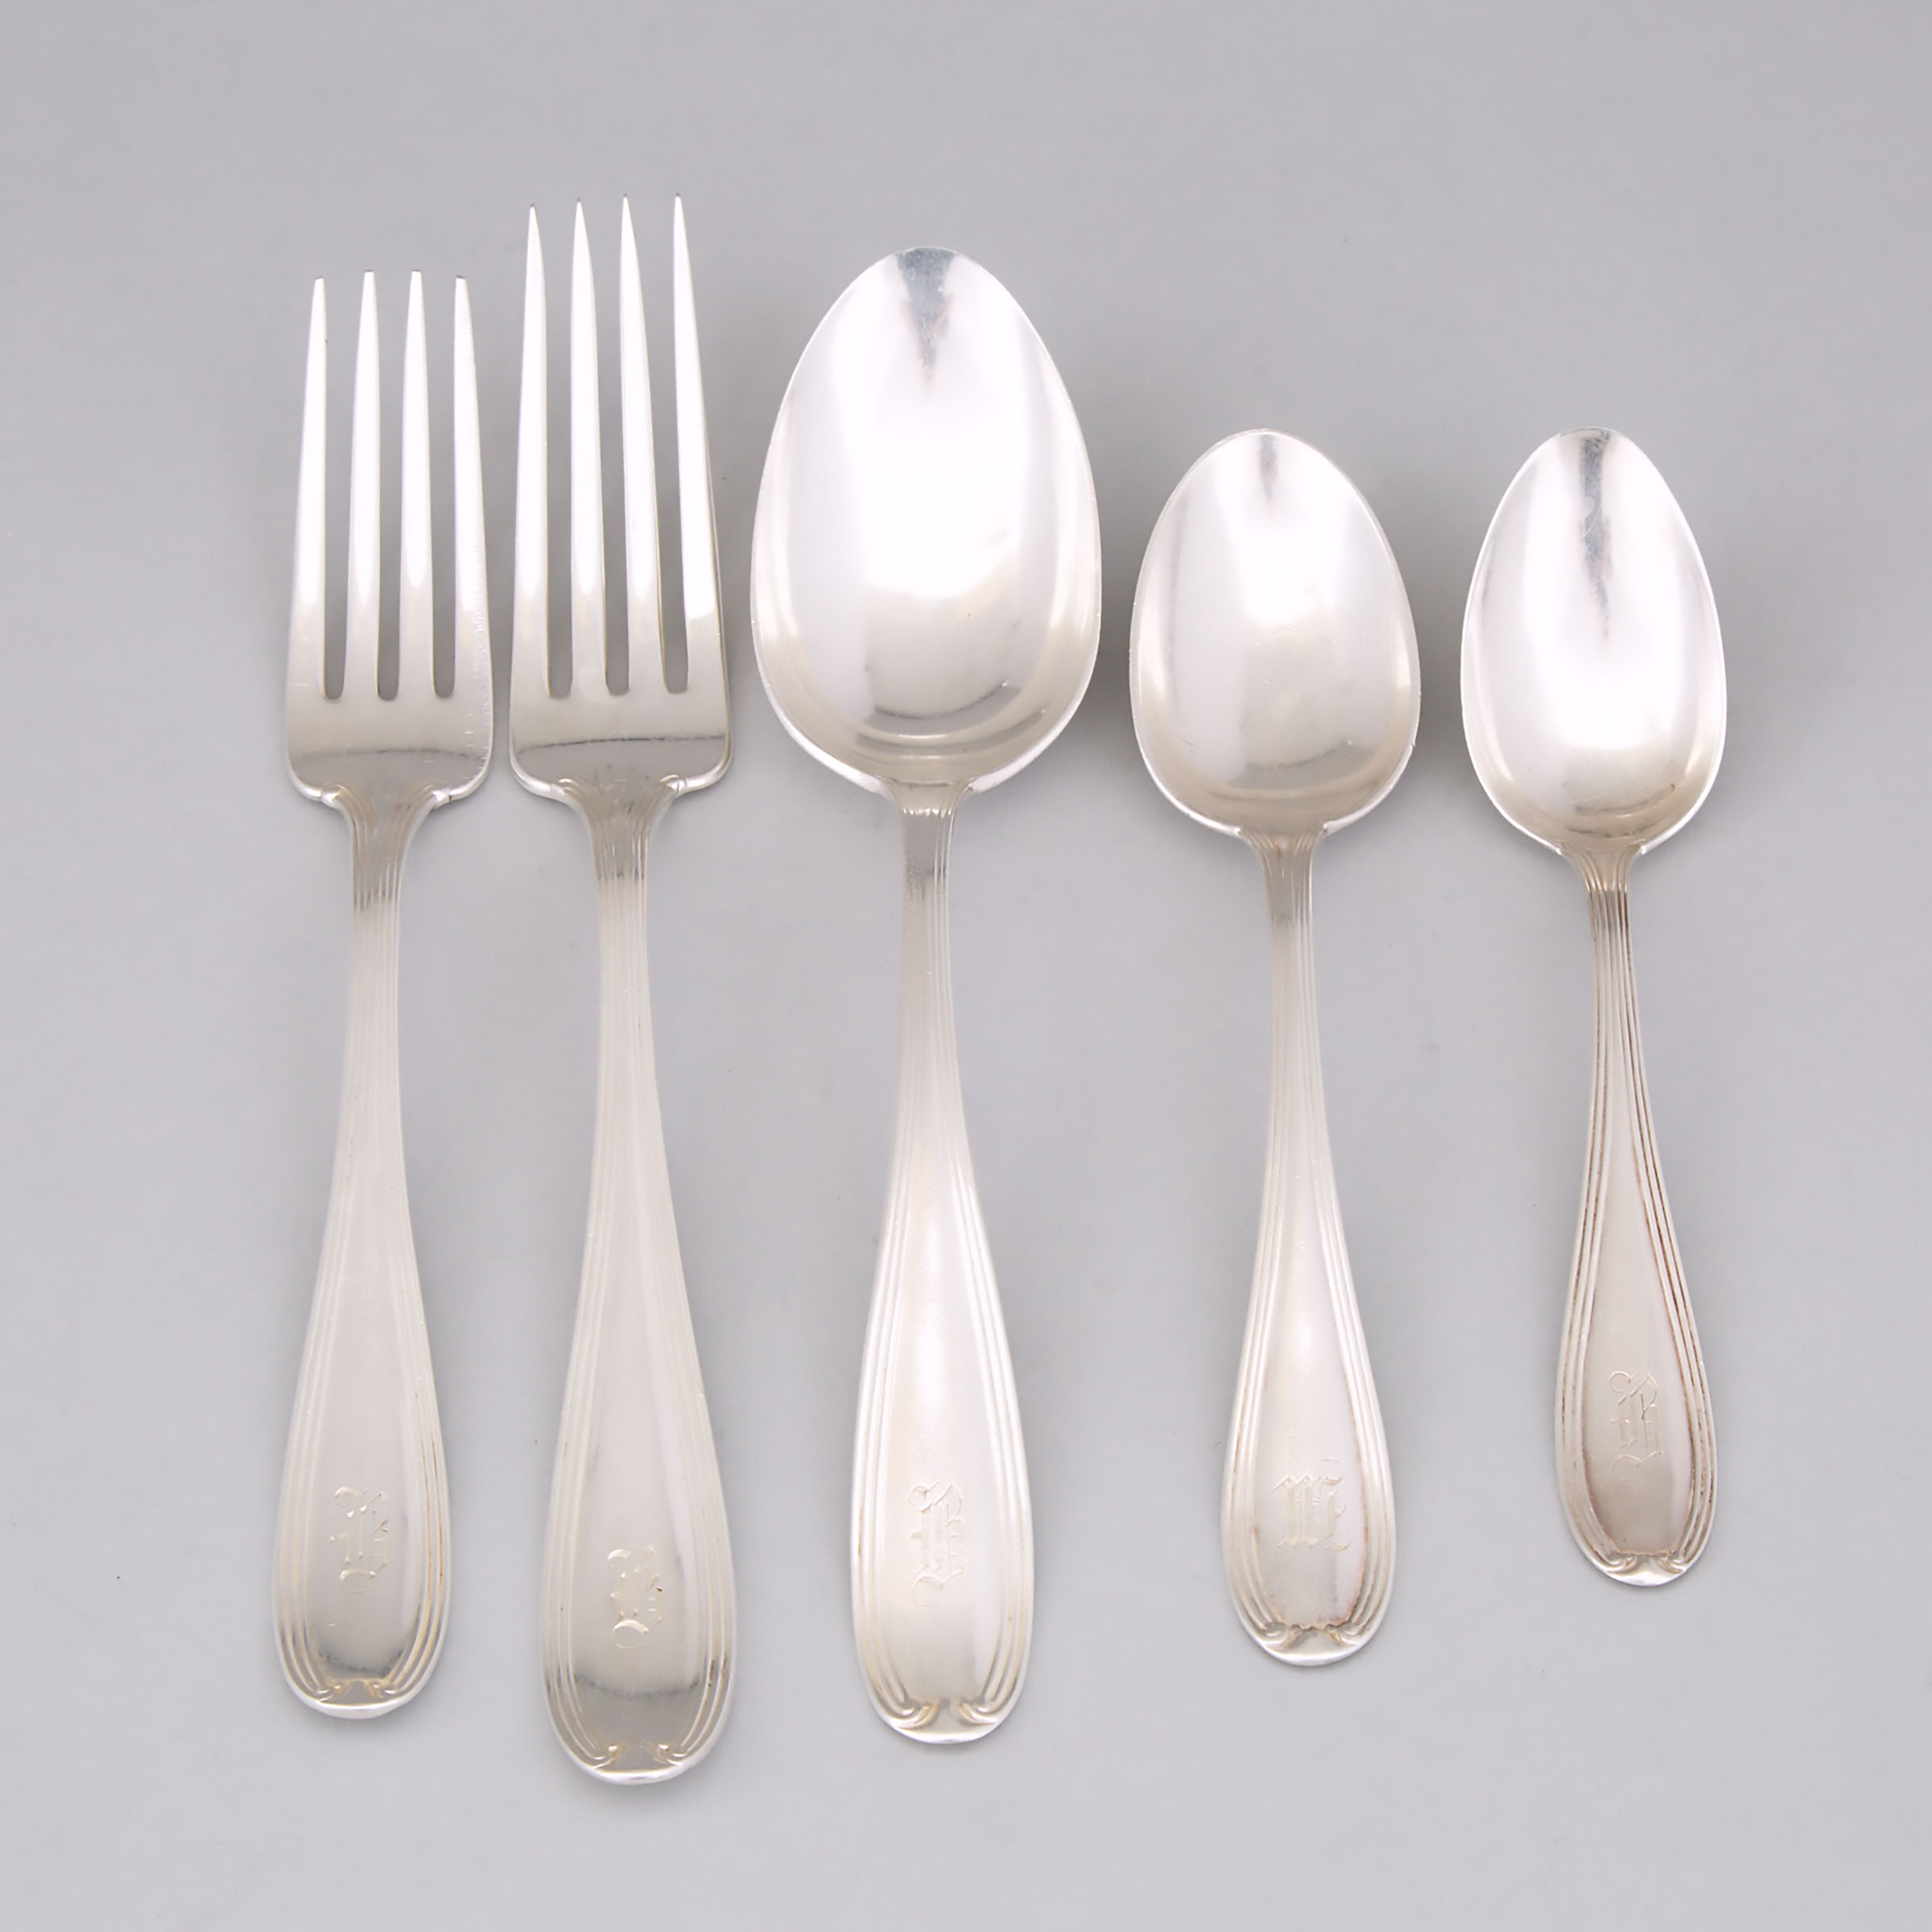 Canadian Silver ‘Stratford’ Pattern Flatware, Roden Bros., Toronto, Ont., early 20th century